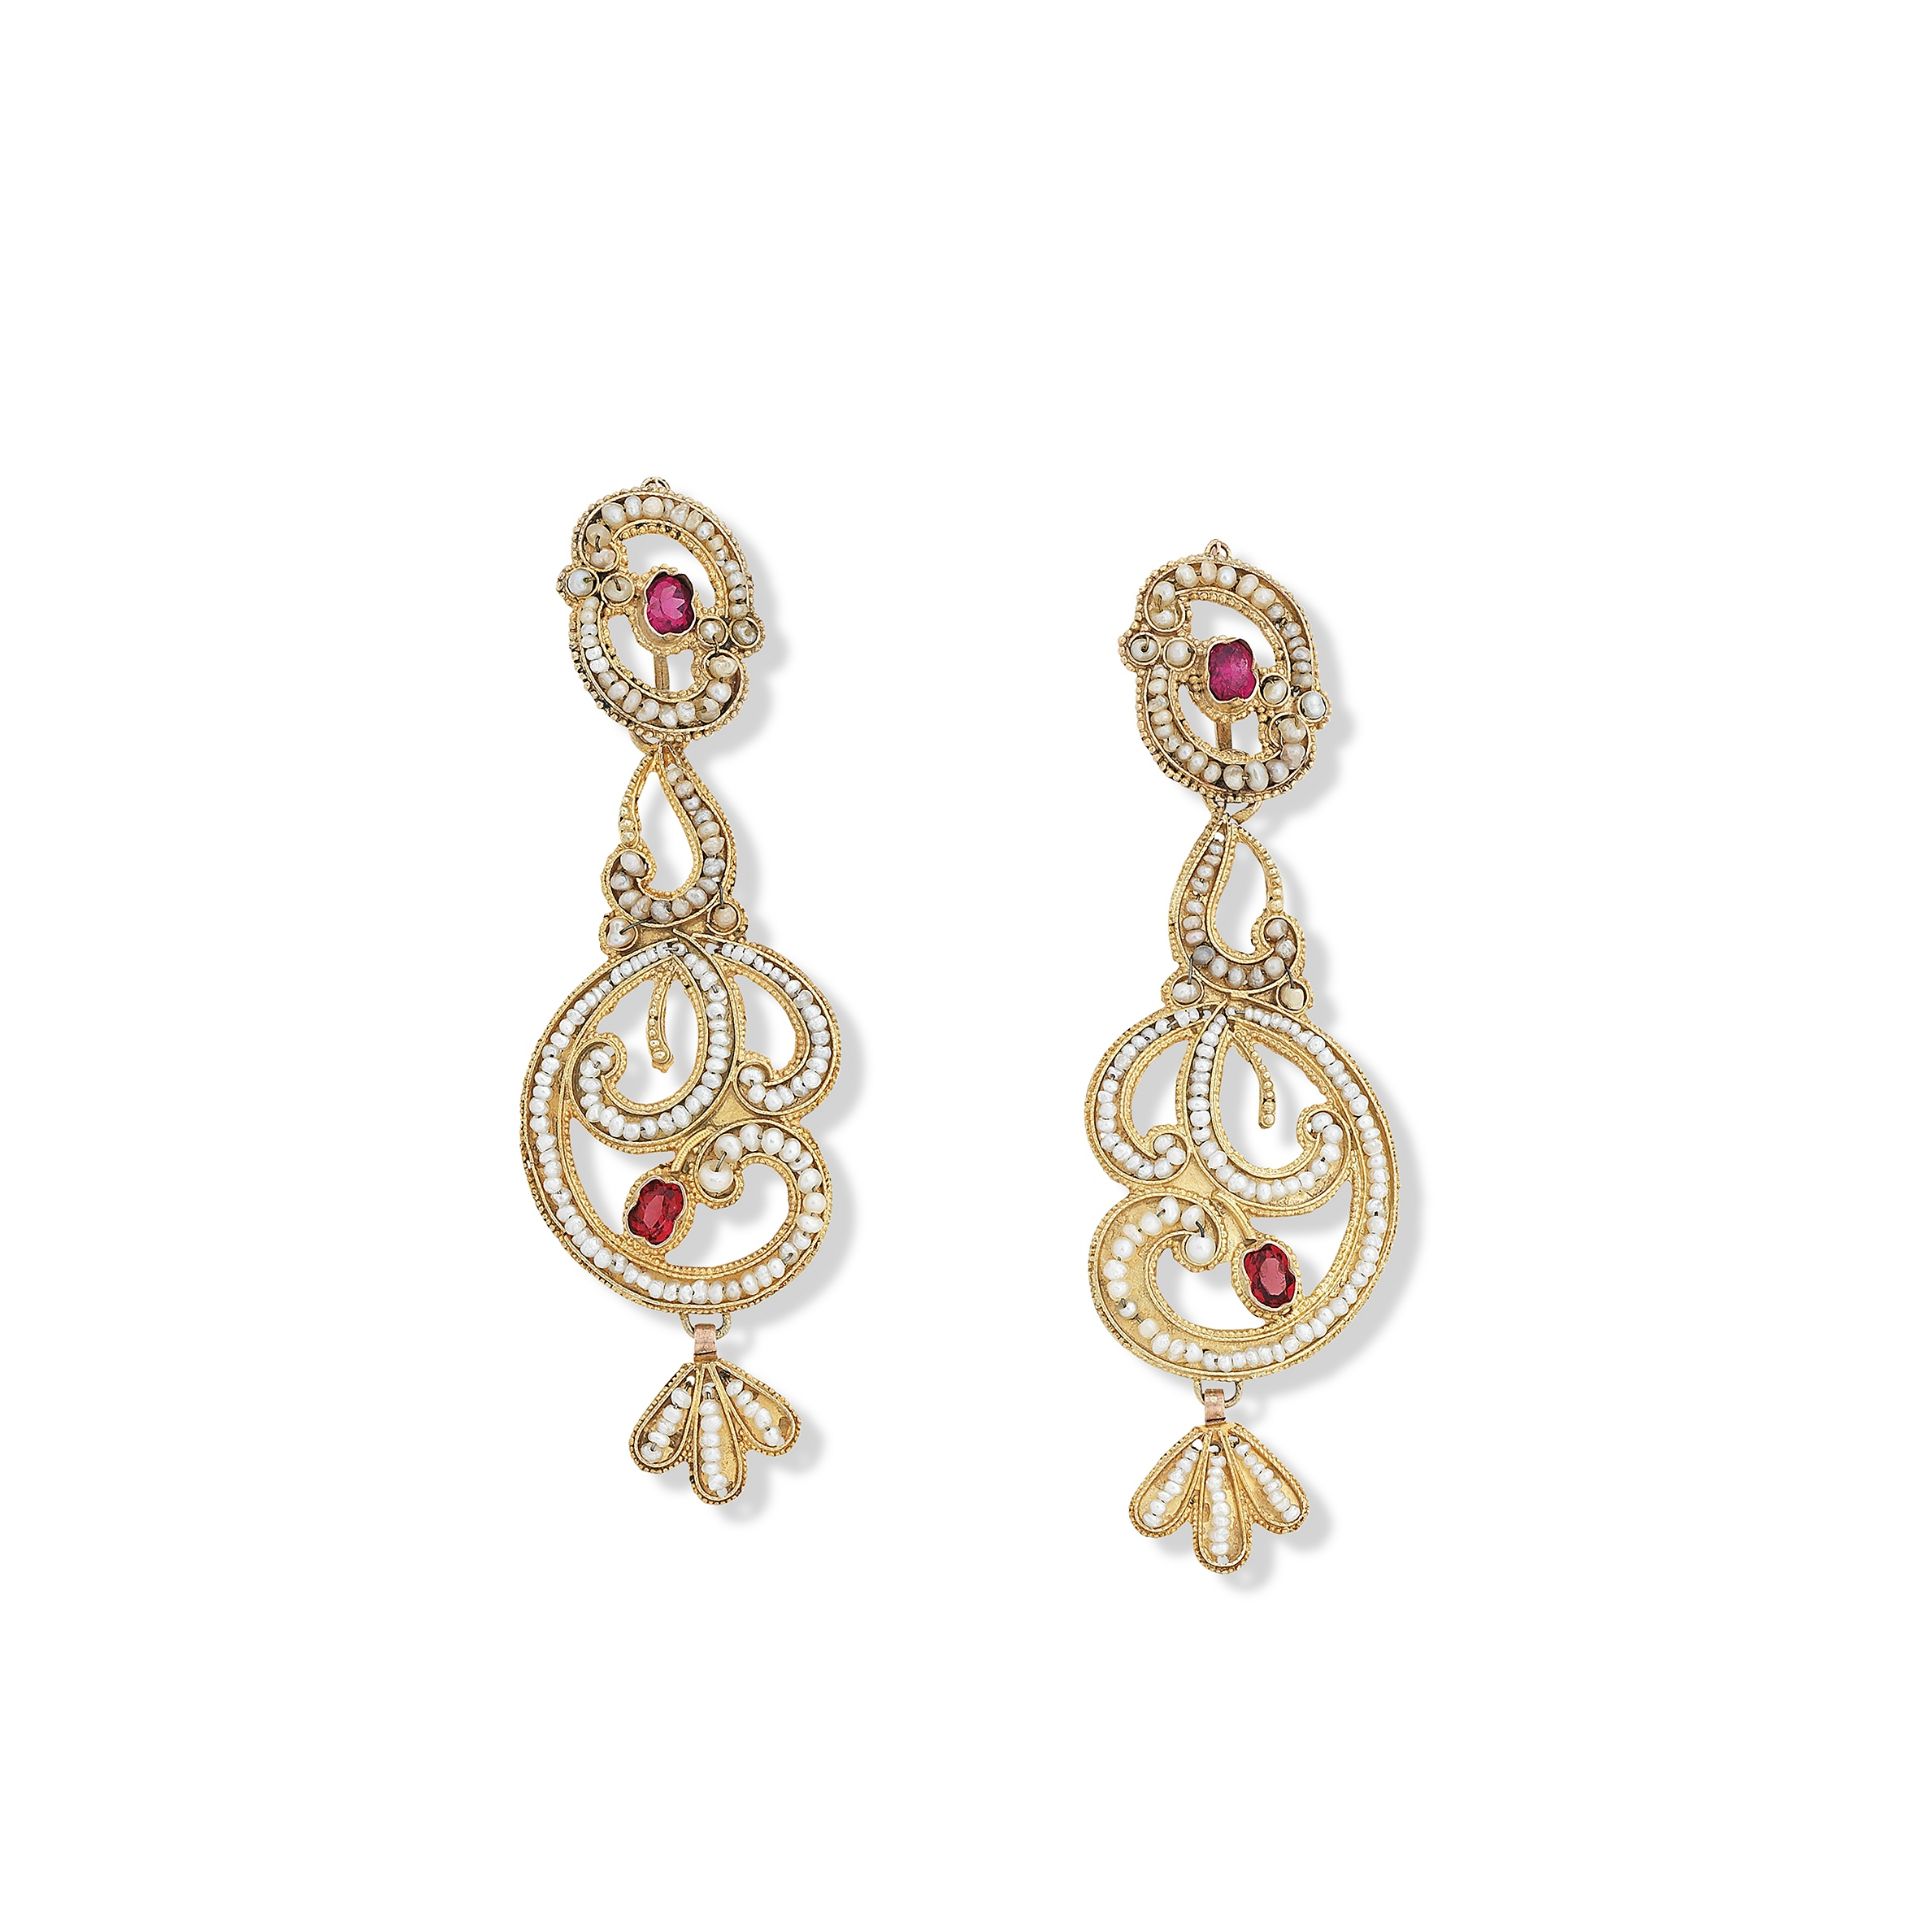 A pair of seed-pearl and paste pendant earrings, first half of 19th century